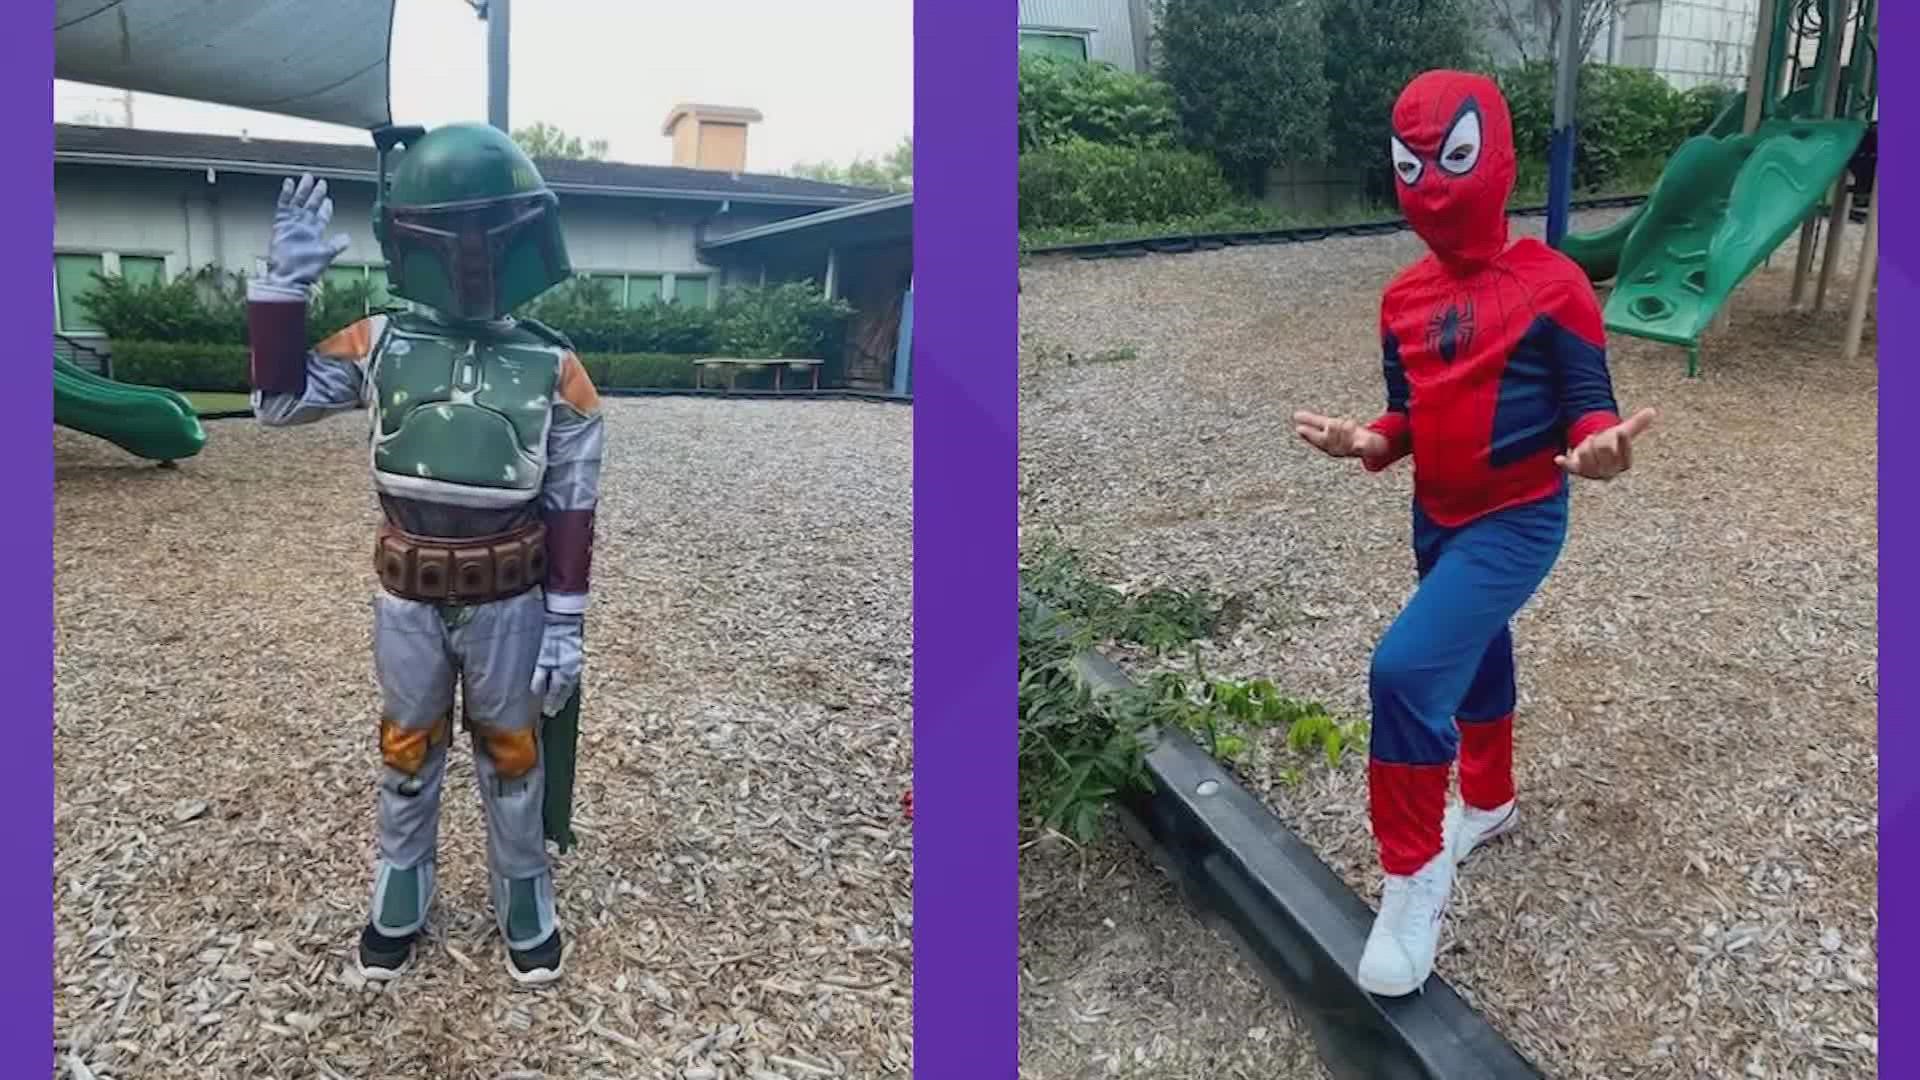 Texans stepped up in a major way to help a teen's effort of collecting Halloween costumes for children in need.